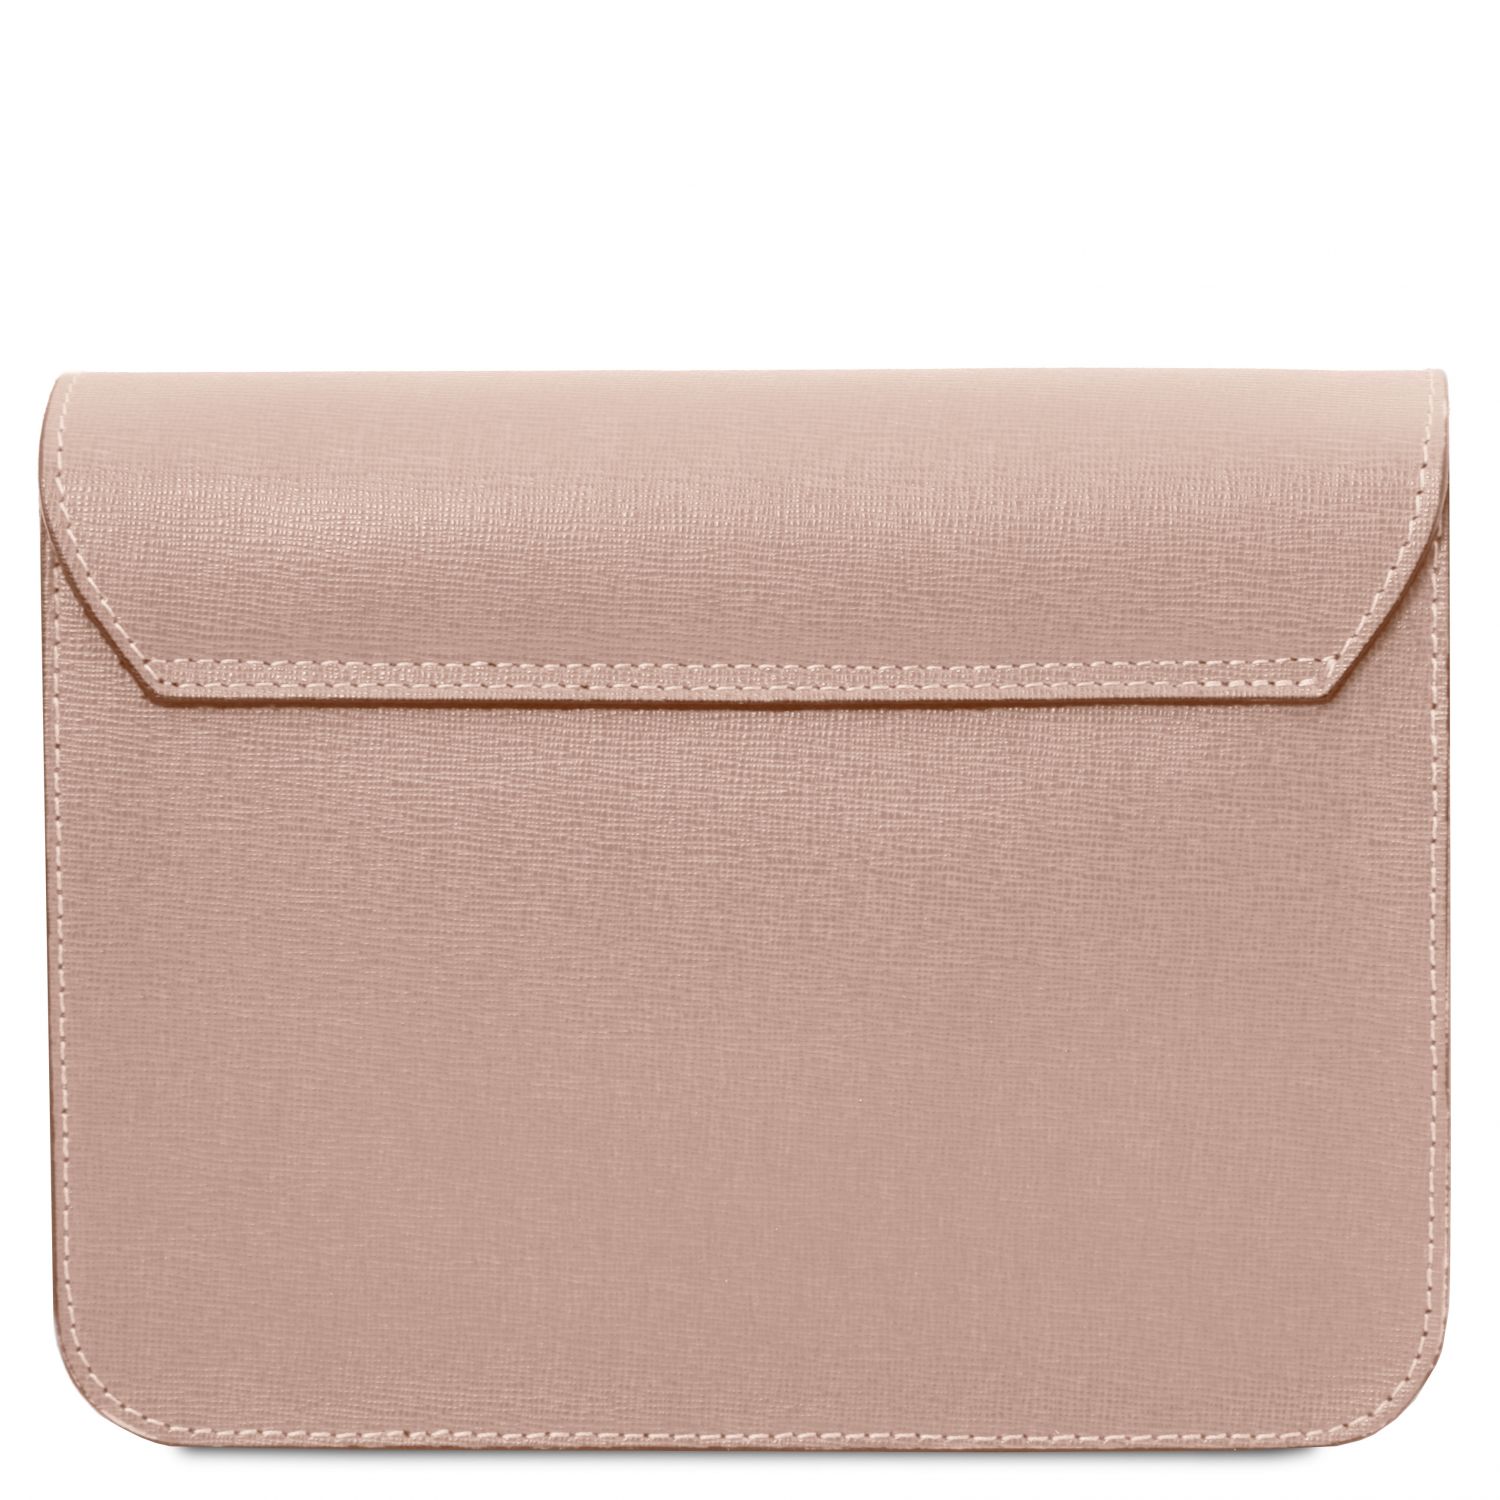 TL Bag Saffiano Leather Clutch With Chain Strap Nude TL141954